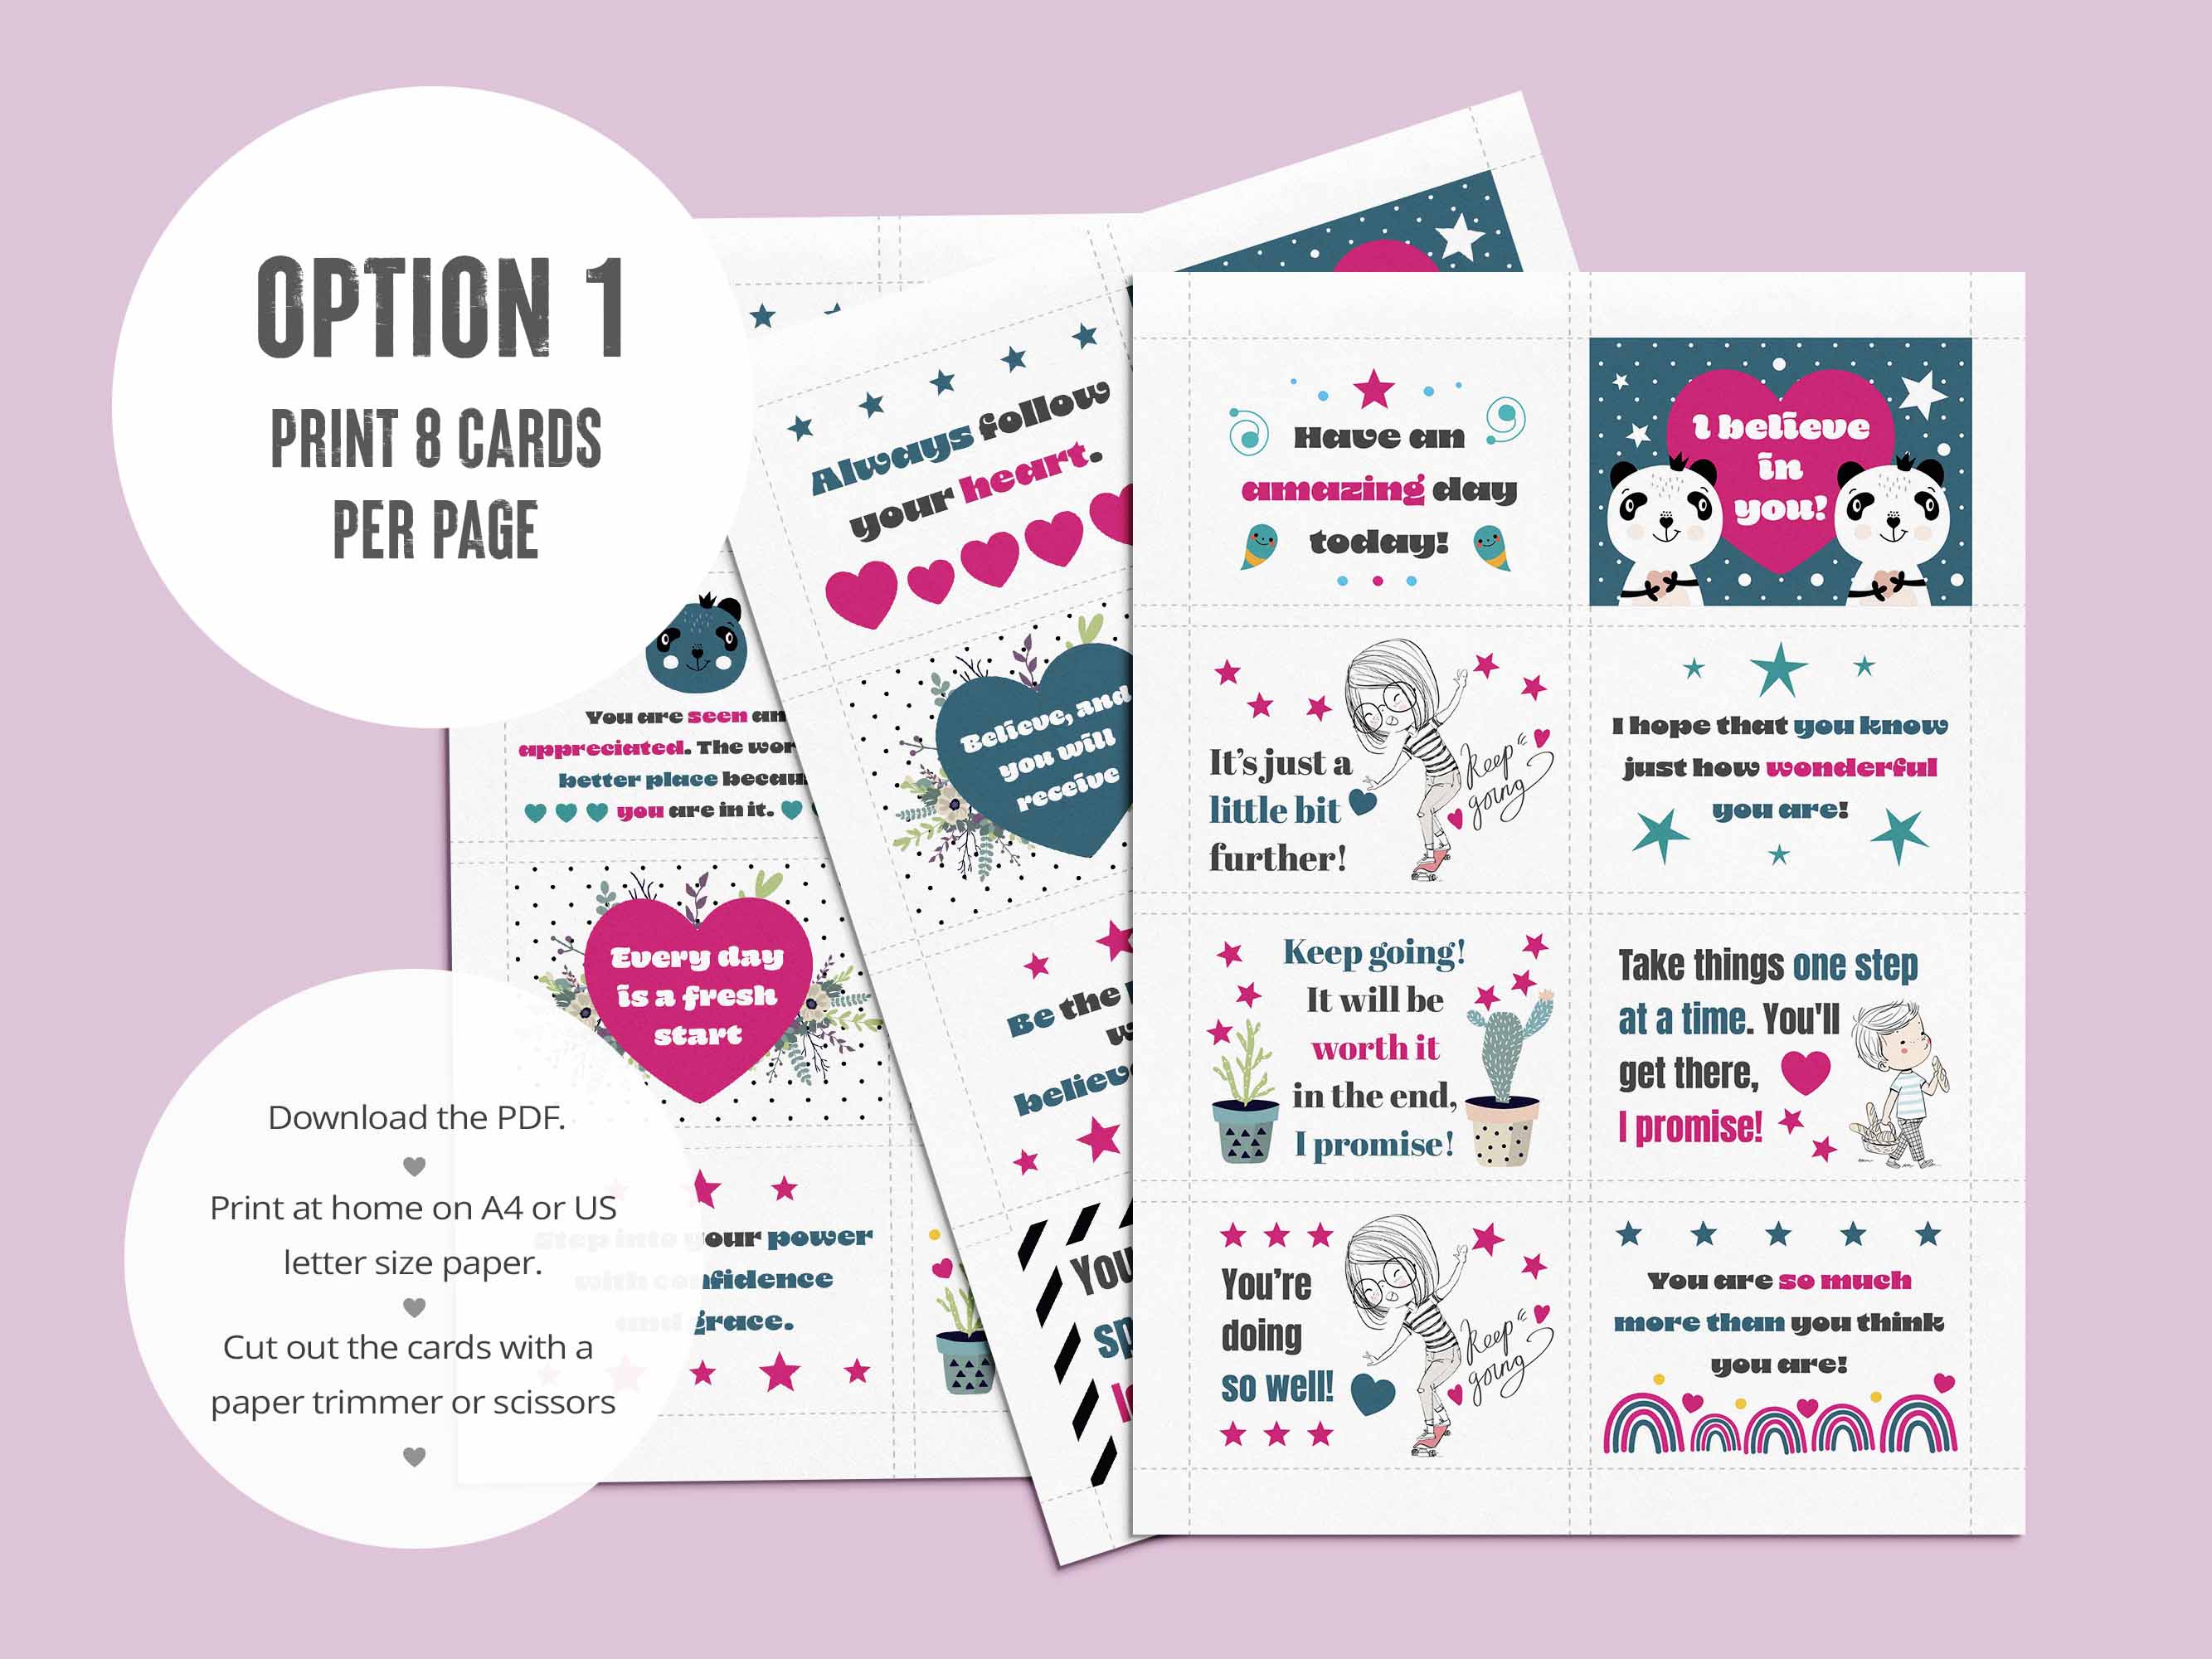 Option One: Print 8 cards to a page. 24 printable kindness cards with words of encouragement. 